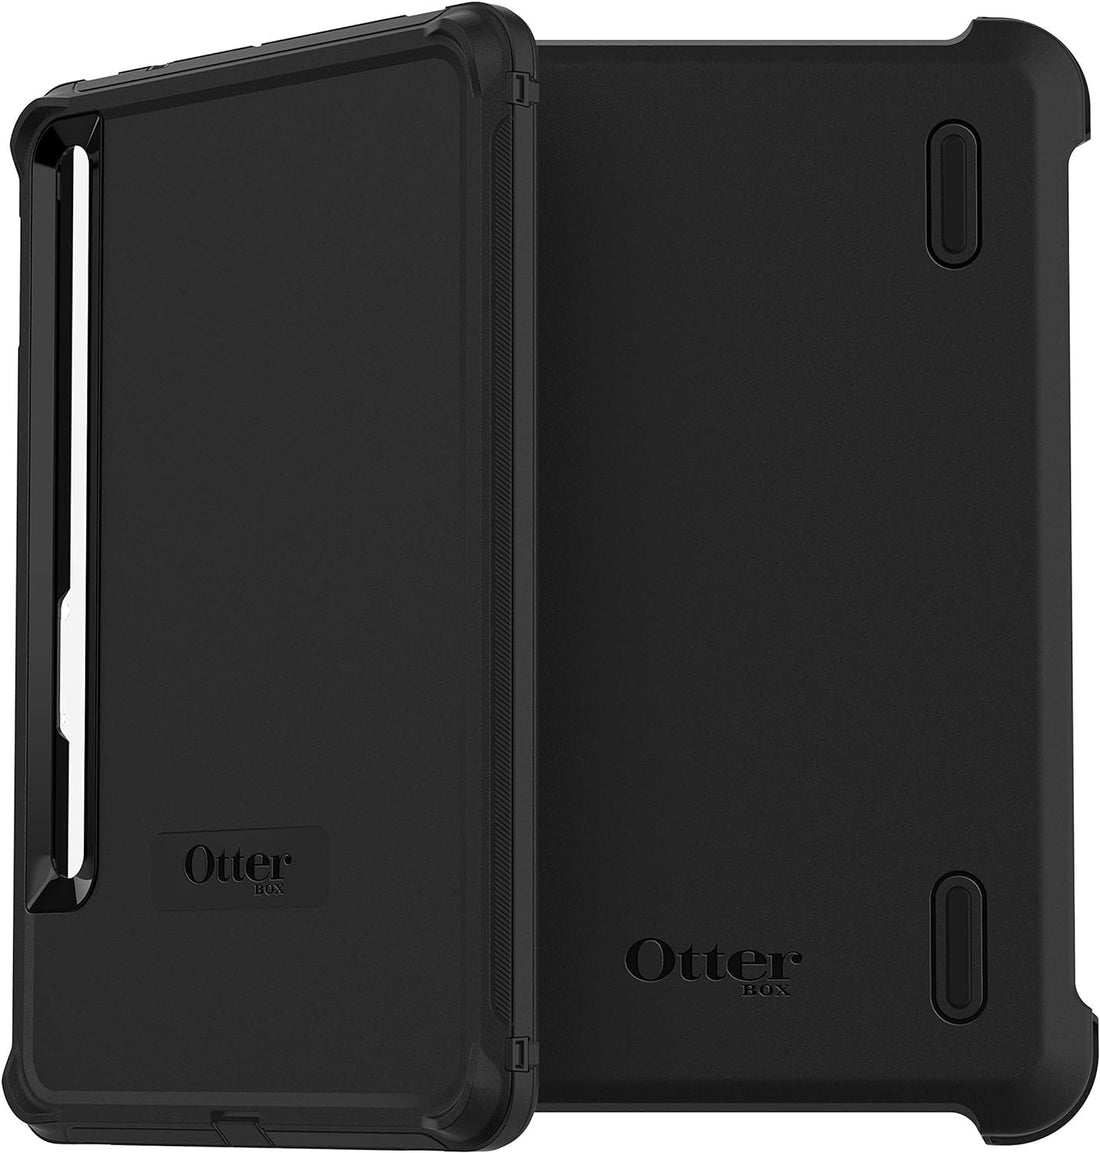 OtterBox DEFENDER SERIES Case for Samsung Galaxy Tab S7 - Black (Certified Refurbished)